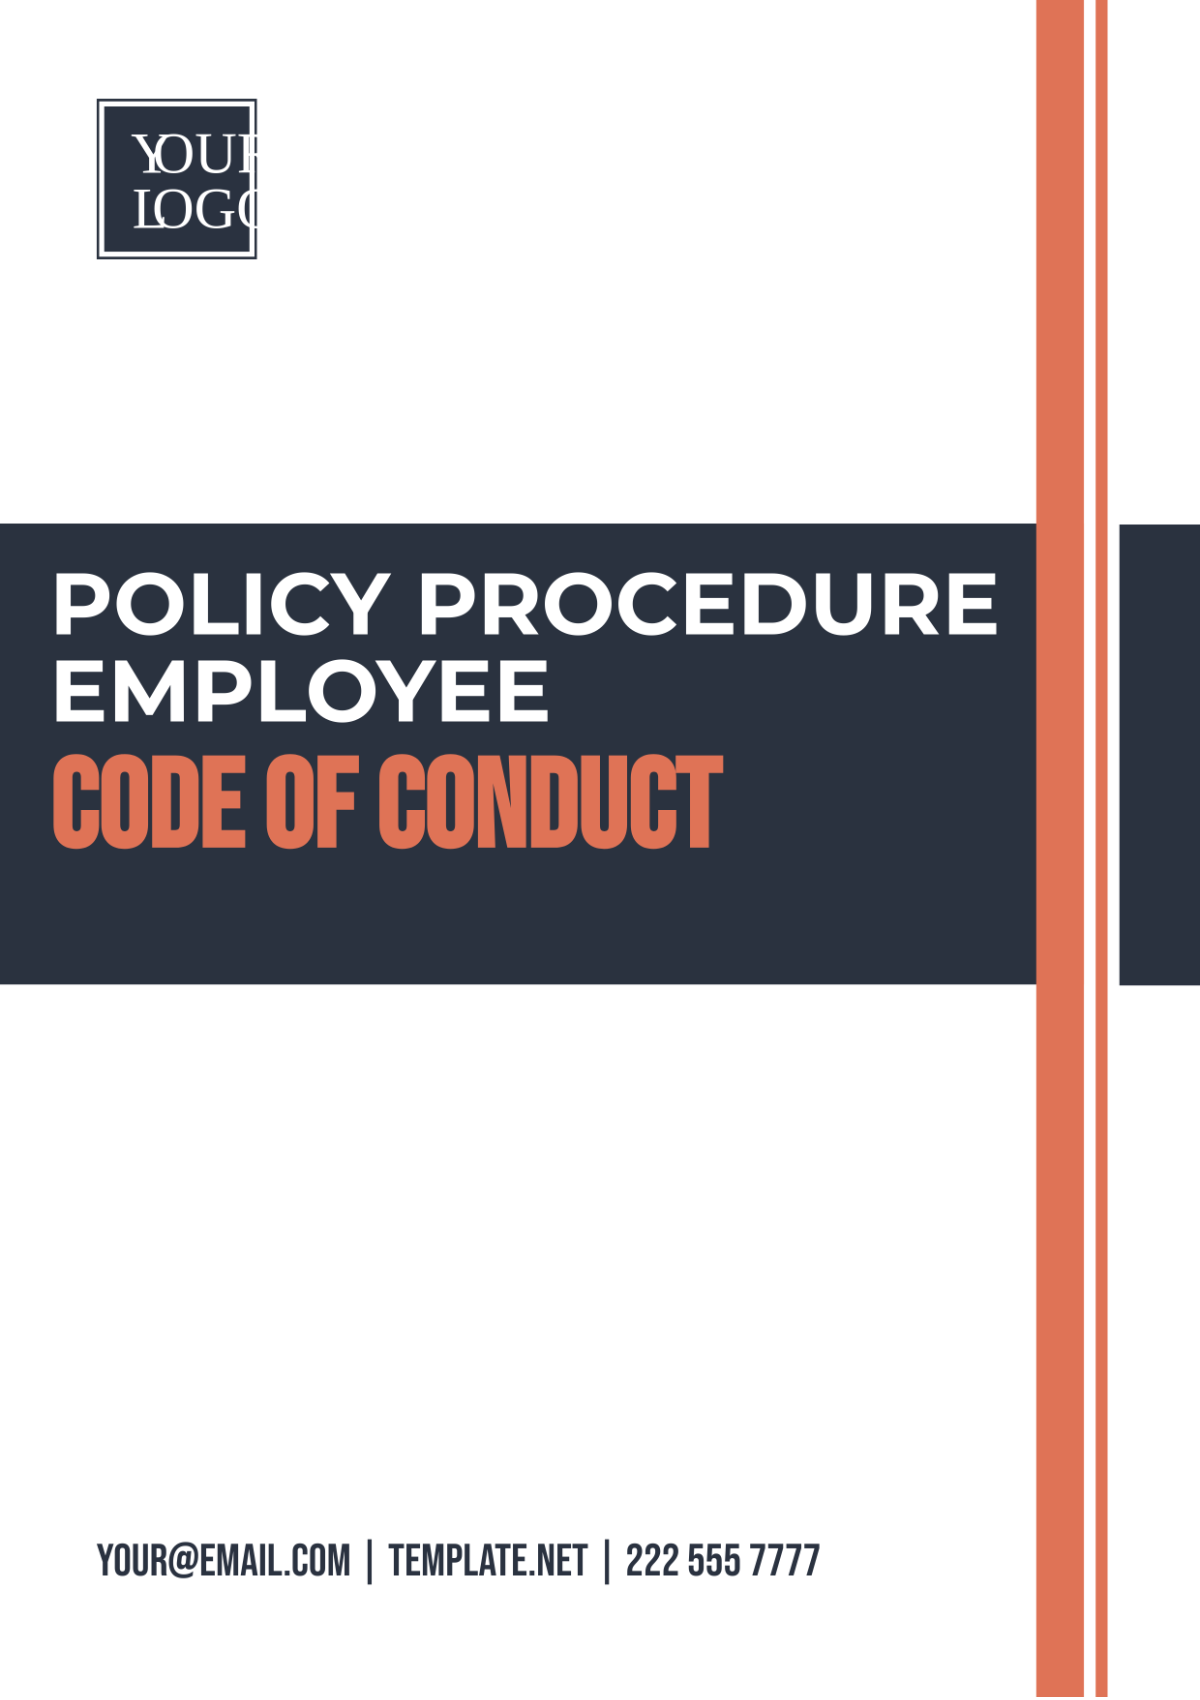 Policy Procedure Employee Code of Conduct Template